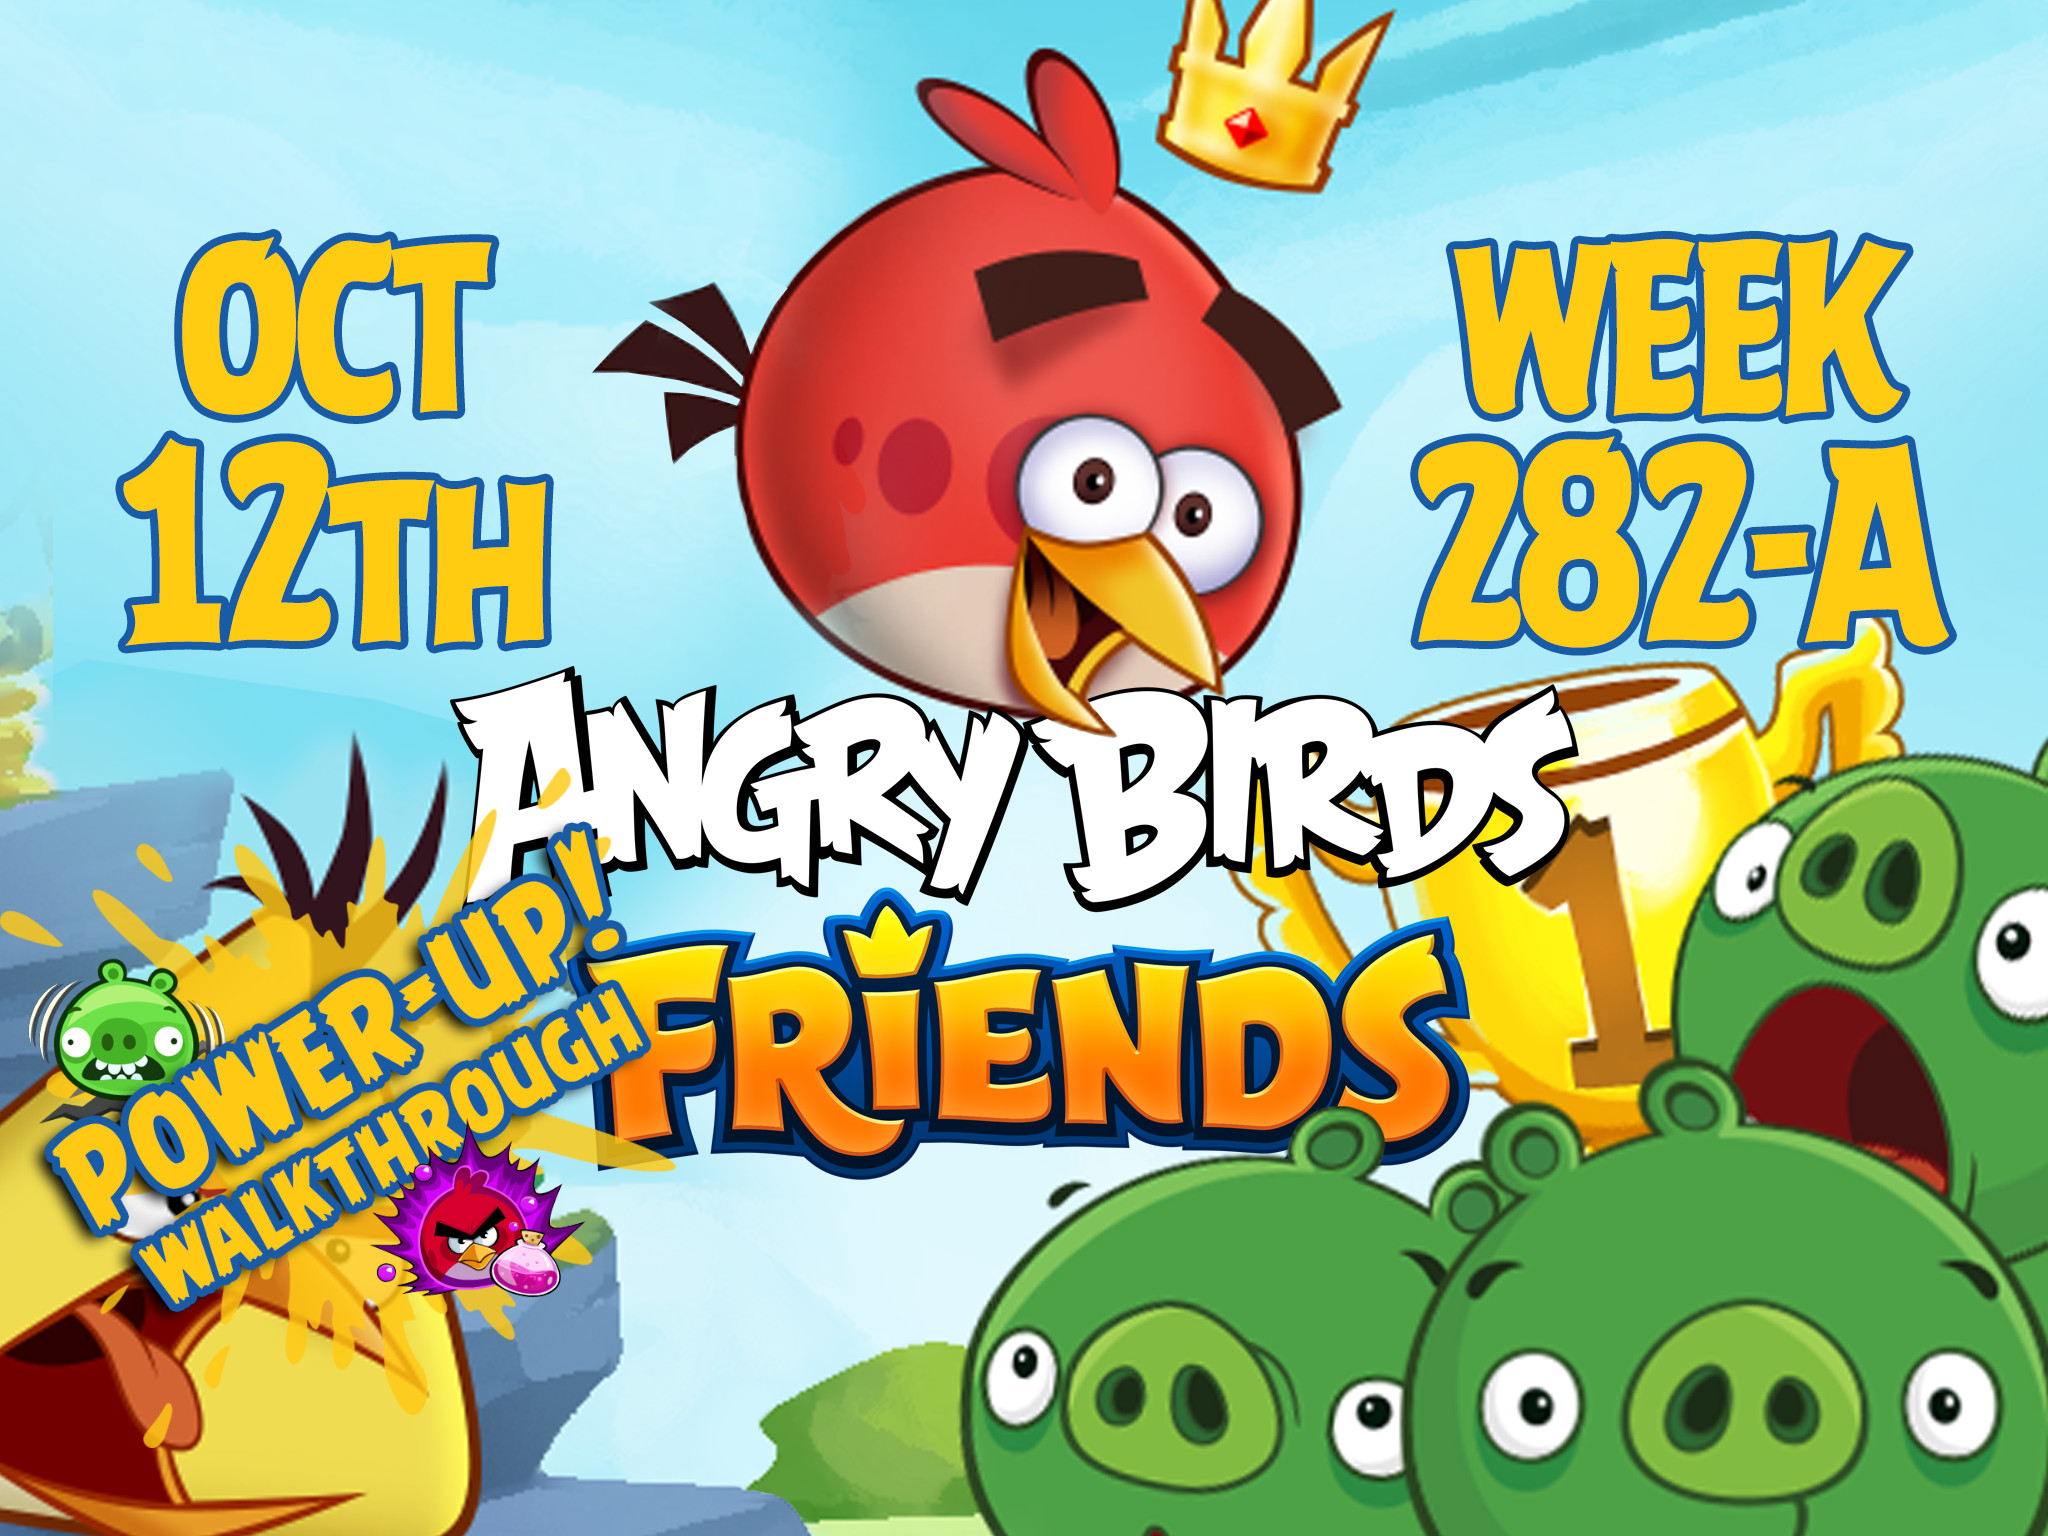 Angry Birds Friends Tournament Week 282-A Feature Image PU